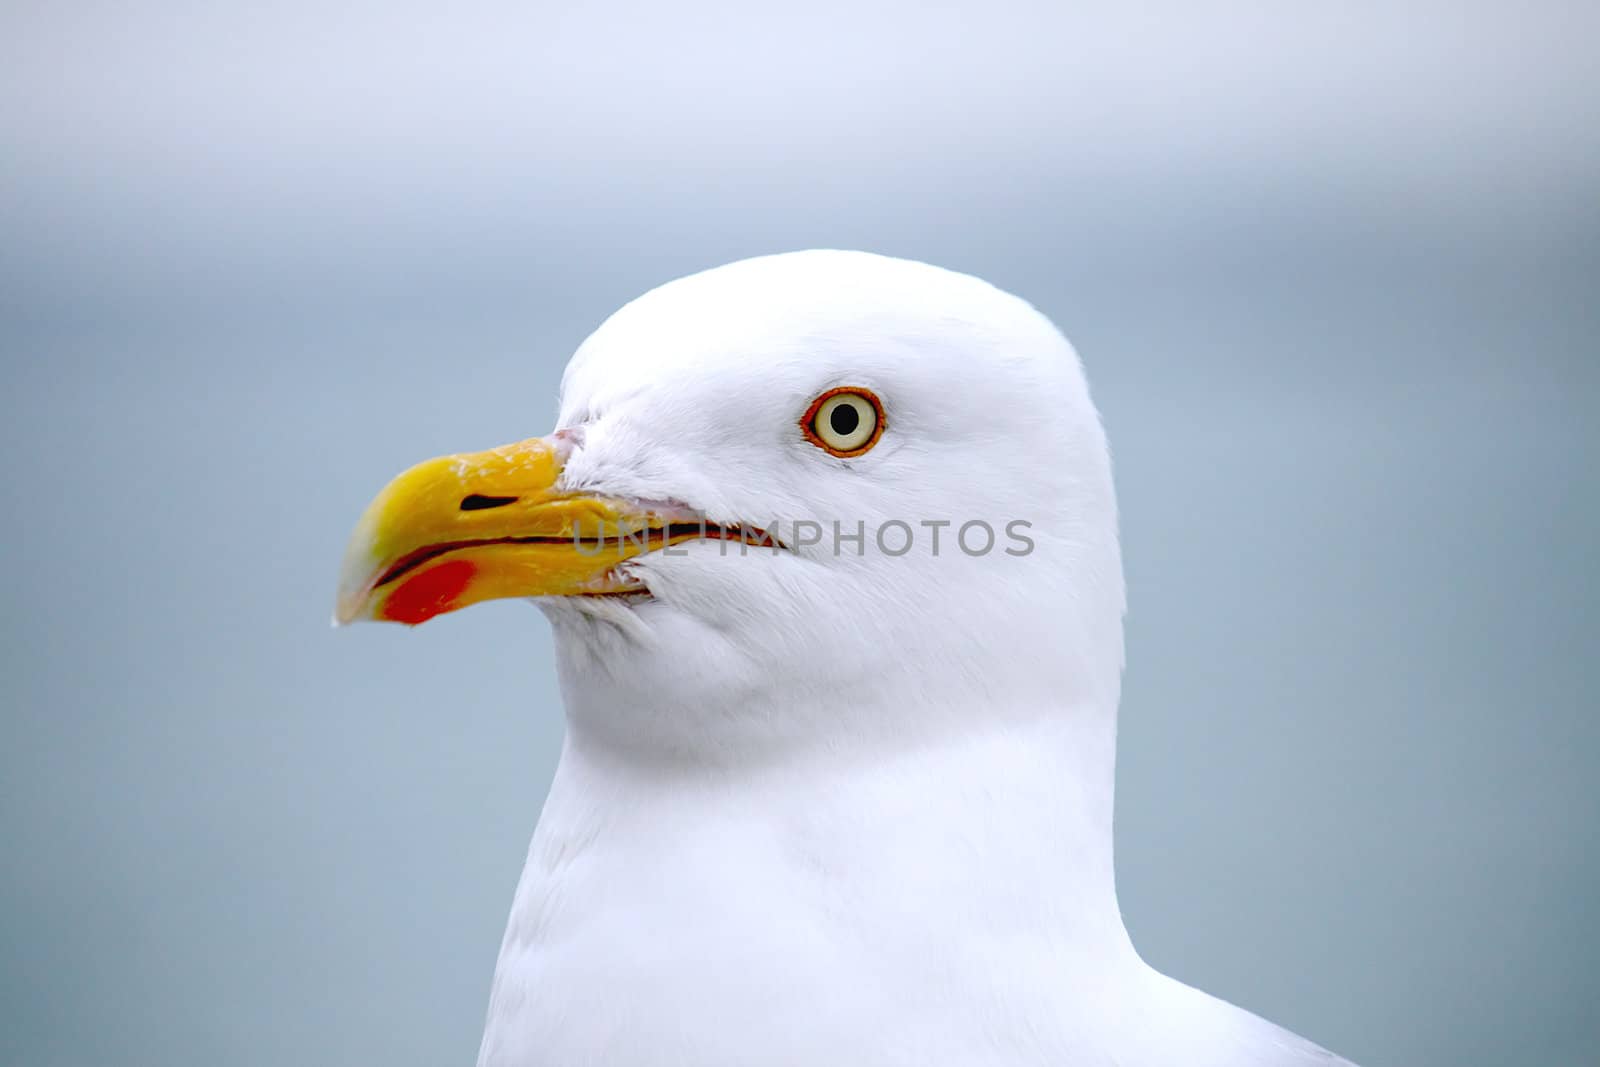 the face of a seagull